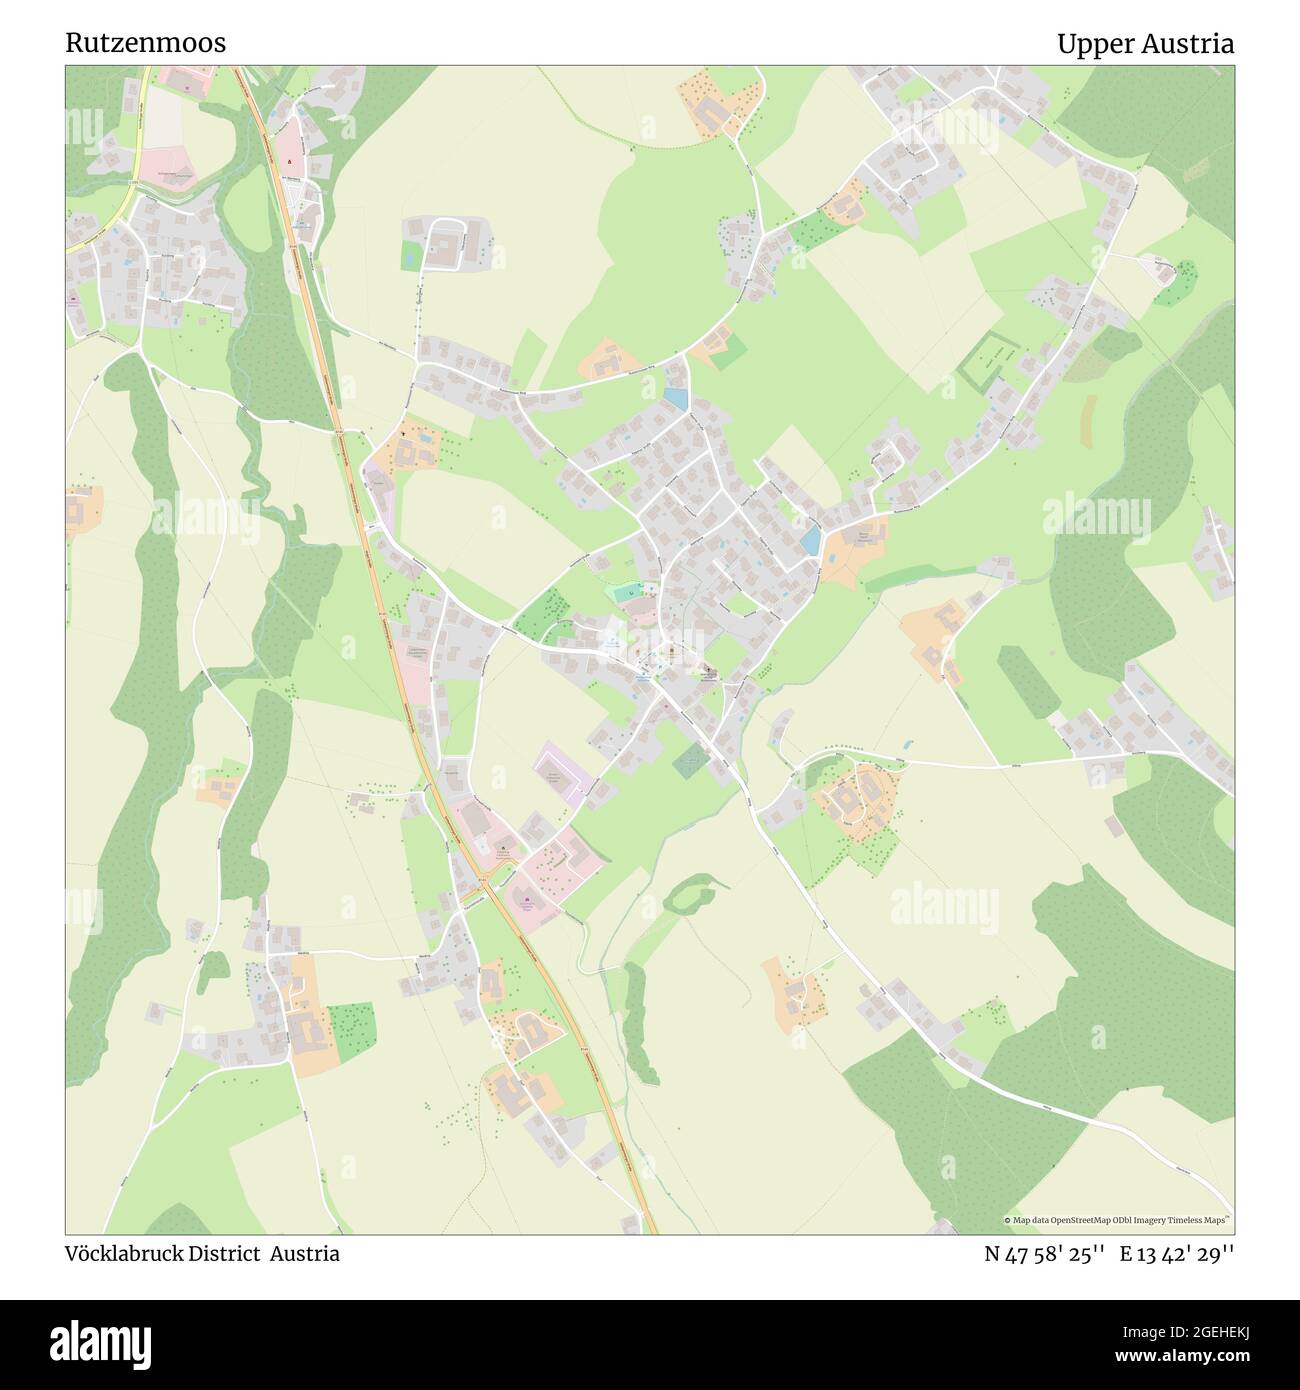 Rutzenmoos, Vöcklabruck District, Austria, Upper Austria, N 47 58' 25'', E 13 42' 29'', map, Timeless Map published in 2021. Travelers, explorers and adventurers like Florence Nightingale, David Livingstone, Ernest Shackleton, Lewis and Clark and Sherlock Holmes relied on maps to plan travels to the world's most remote corners, Timeless Maps is mapping most locations on the globe, showing the achievement of great dreams Stock Photo